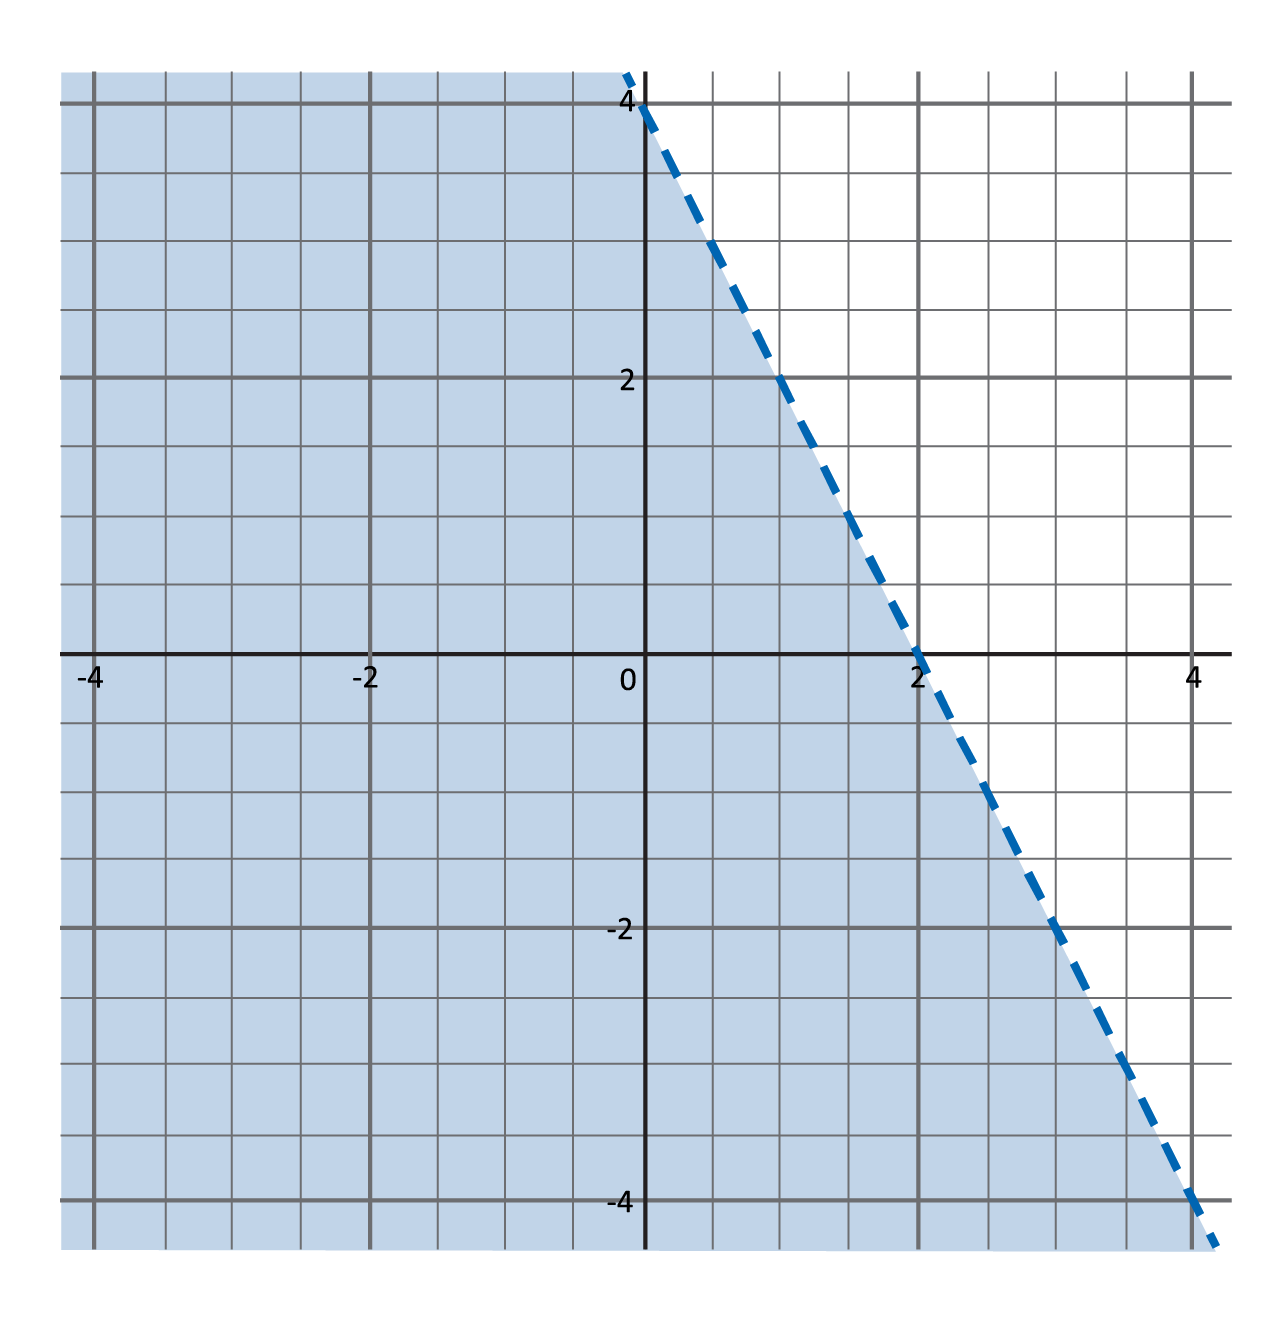 dashed blue line passing through the points (0, 4) and (2, 0), below line is shaded blue